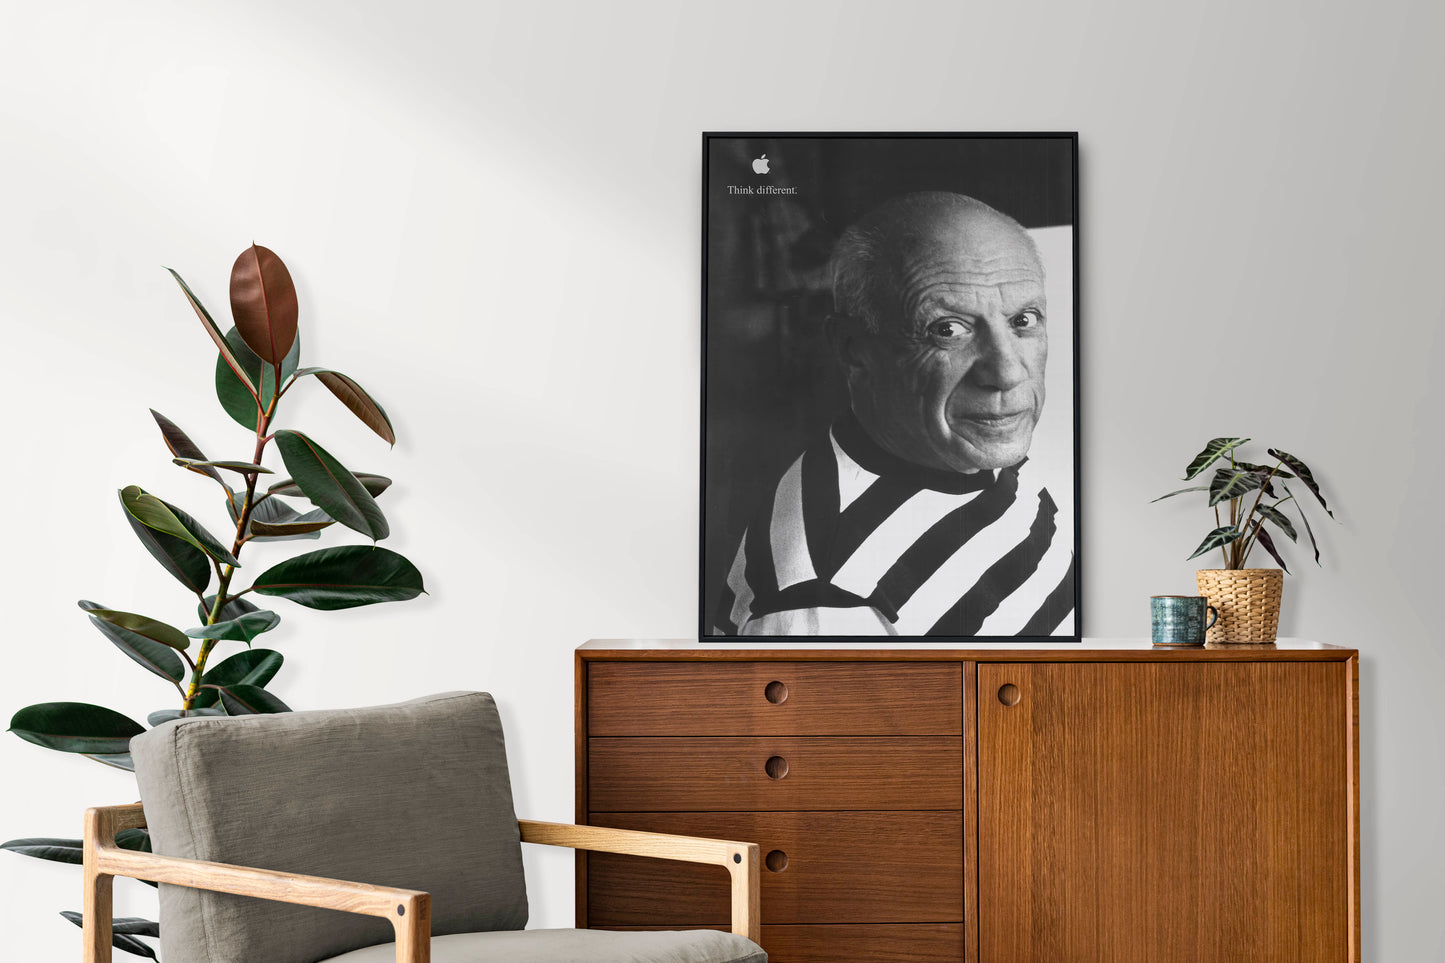 Apple Pablo Picasso "Think Different" Poster